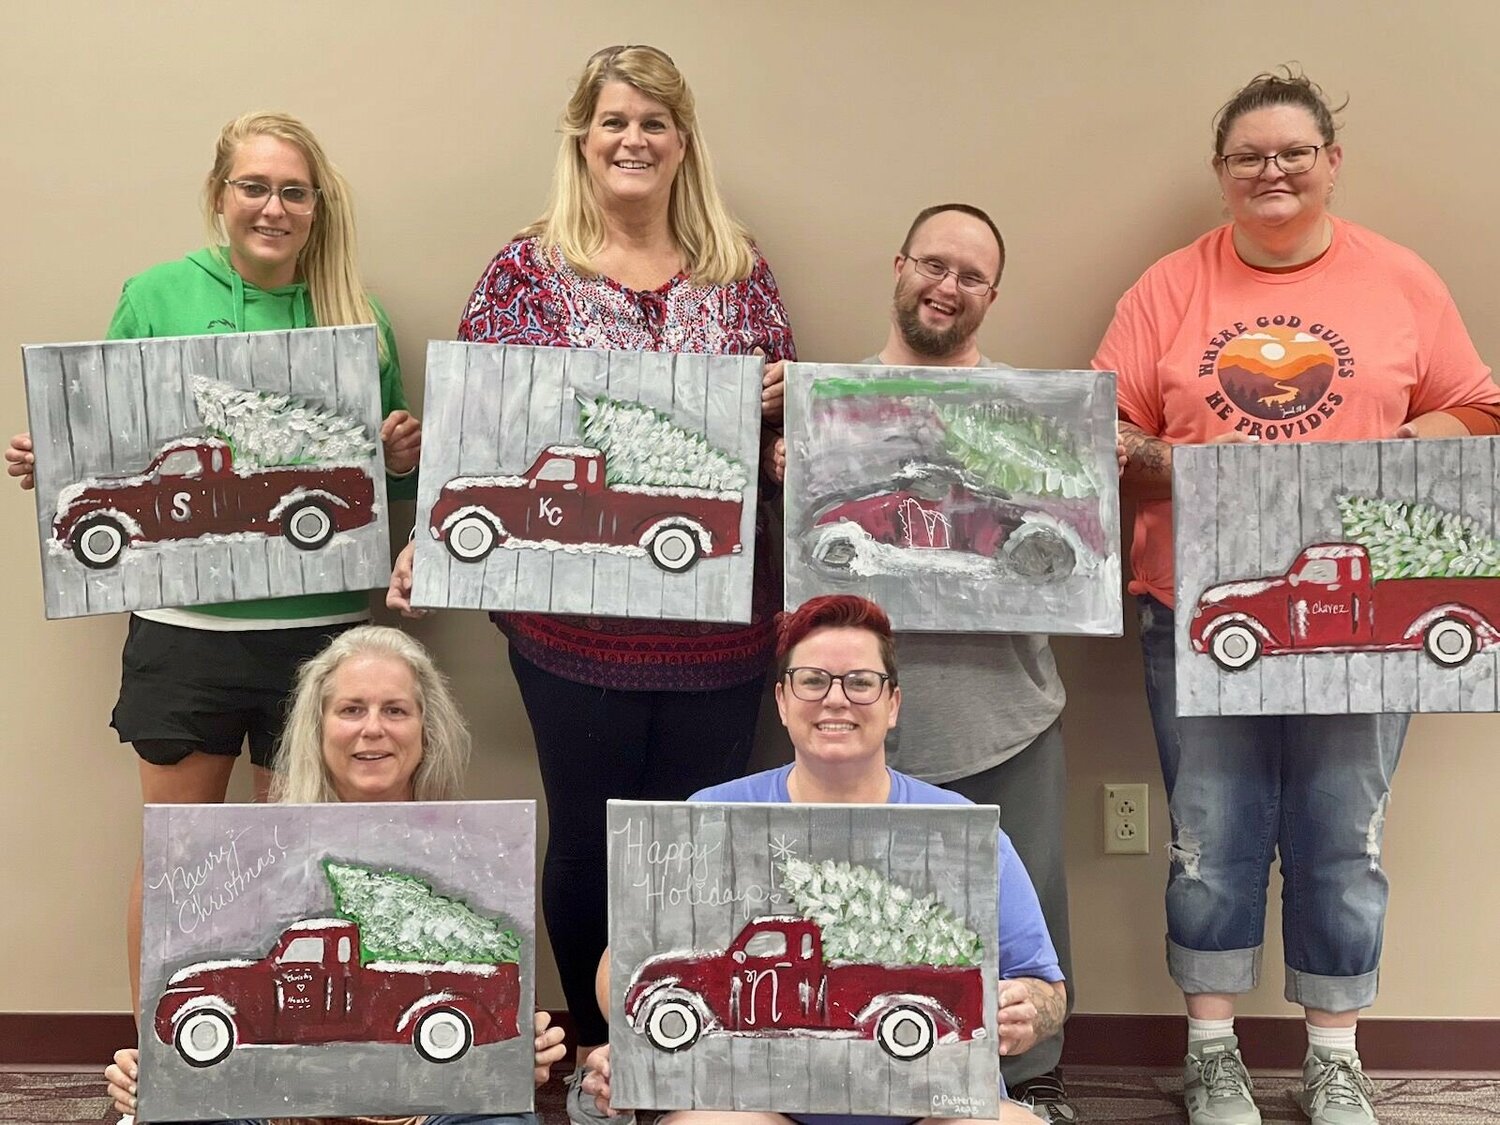 Trunk &amp; Tree Paint Party, a benefit for Christos House, was hosted by local artist Tara Shahan on the evening of Oct. 24 in the Magnolia Room at the West Plains Civic Center. Sixteen people participated in the event with Shahan leading them in painting a classic red pickup truck hauling a freshly-cut Christmas tree. "We had a very fun and positive response, and we will look at doing this again soon," said Christos House Interim Executive Director Kelli Neel. Sitting, from left: Neel and Christos House Outreach advocate Crystal Patterson. Standing: Samantha Oakes, Christos House Outreach advocate Kenya Cook, Clint Walker and Windy Chavez.